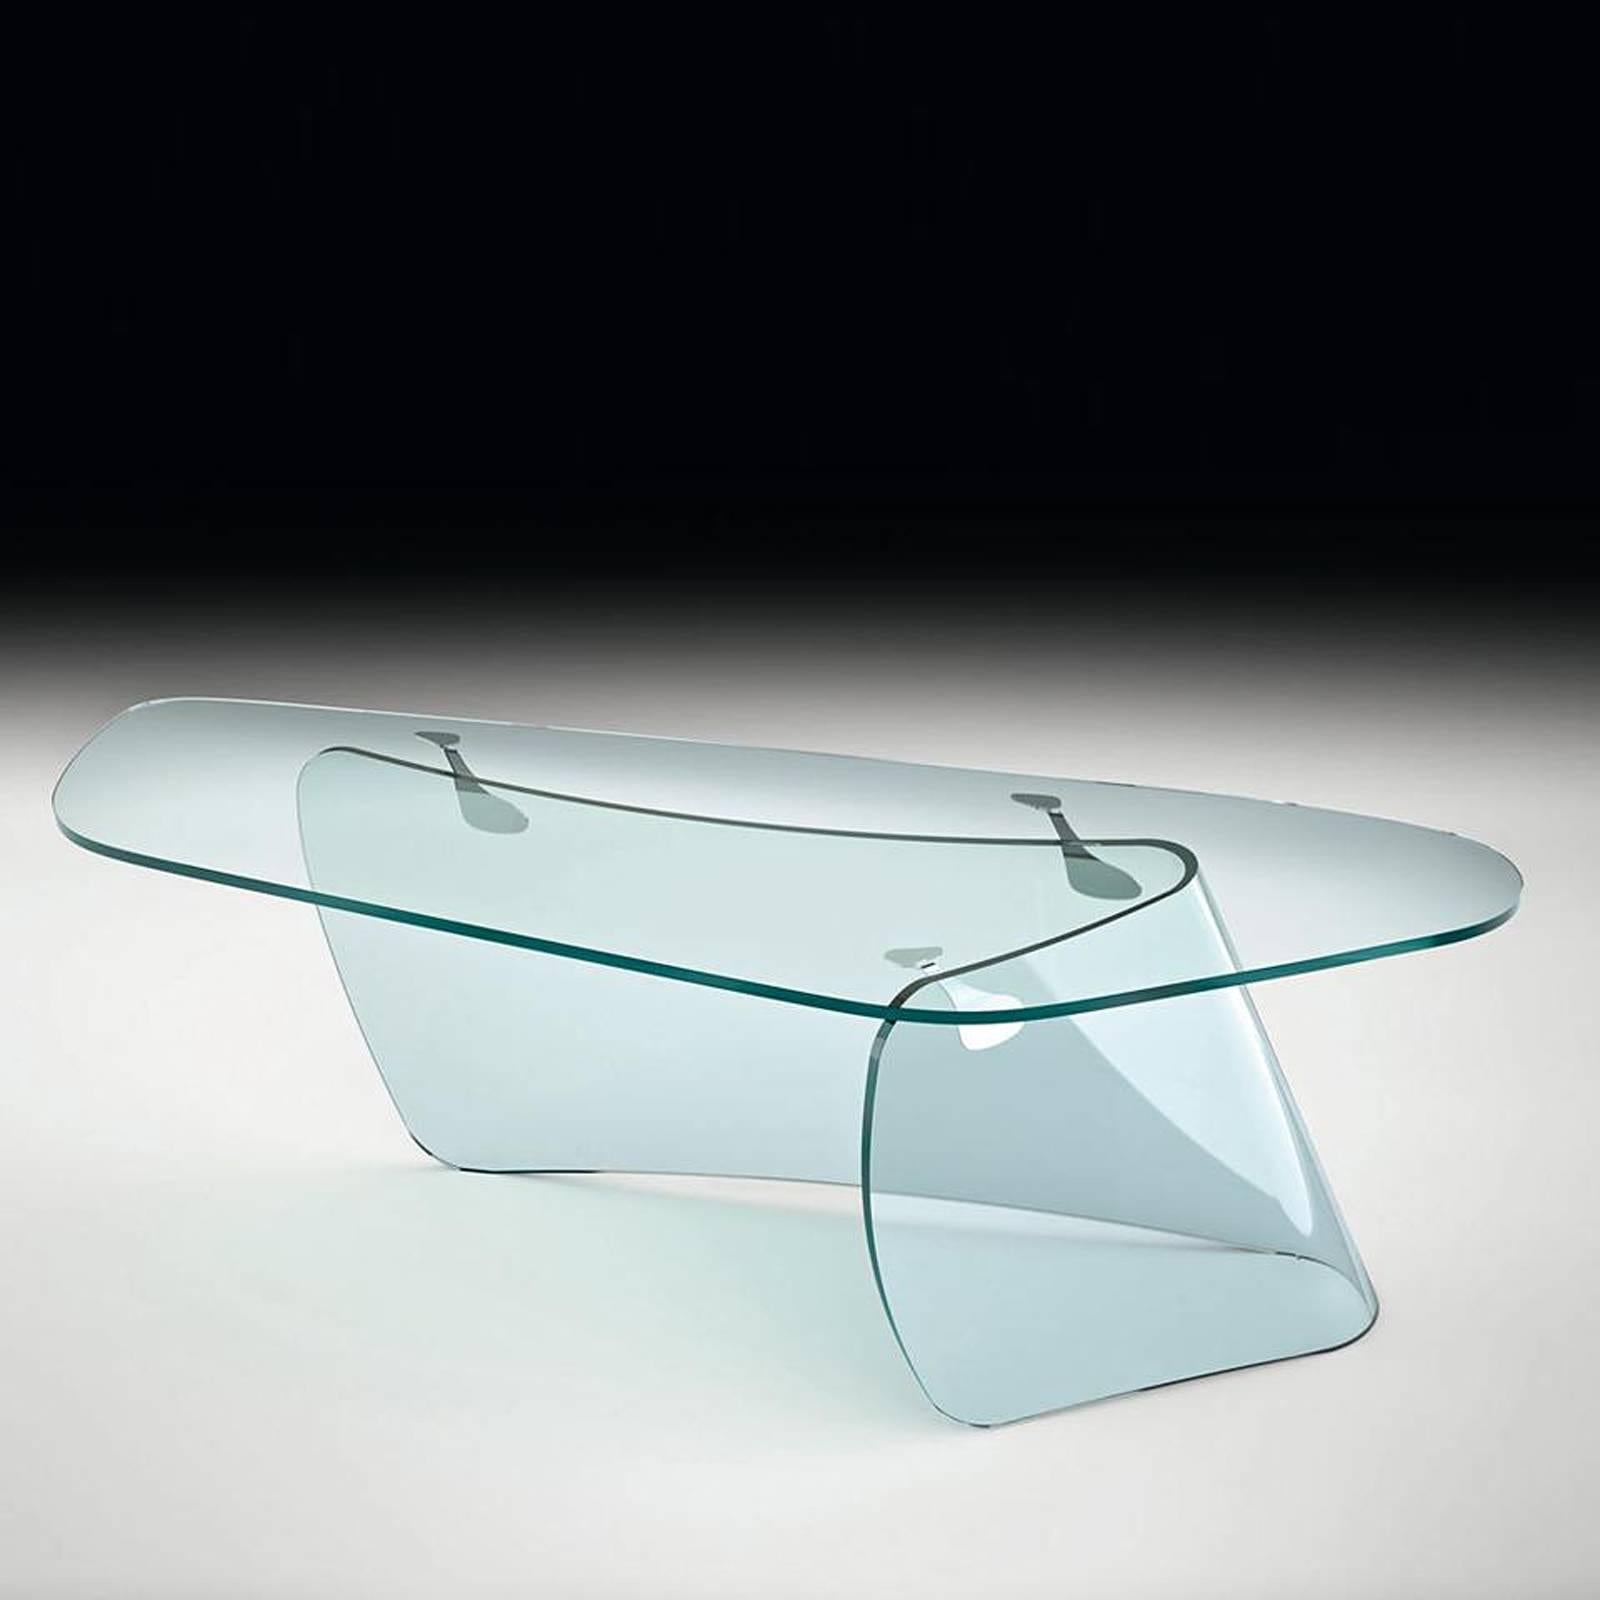 Desk Absolut composed of a curved transparent glass base
19mm and a clear glass top 15mm with fastening plates in 
polished stainless steel.
Available on request in:
L220xD80xH74cm, price: € 10,700.00
L250xD91xH74cm, price: € 11,500.00

